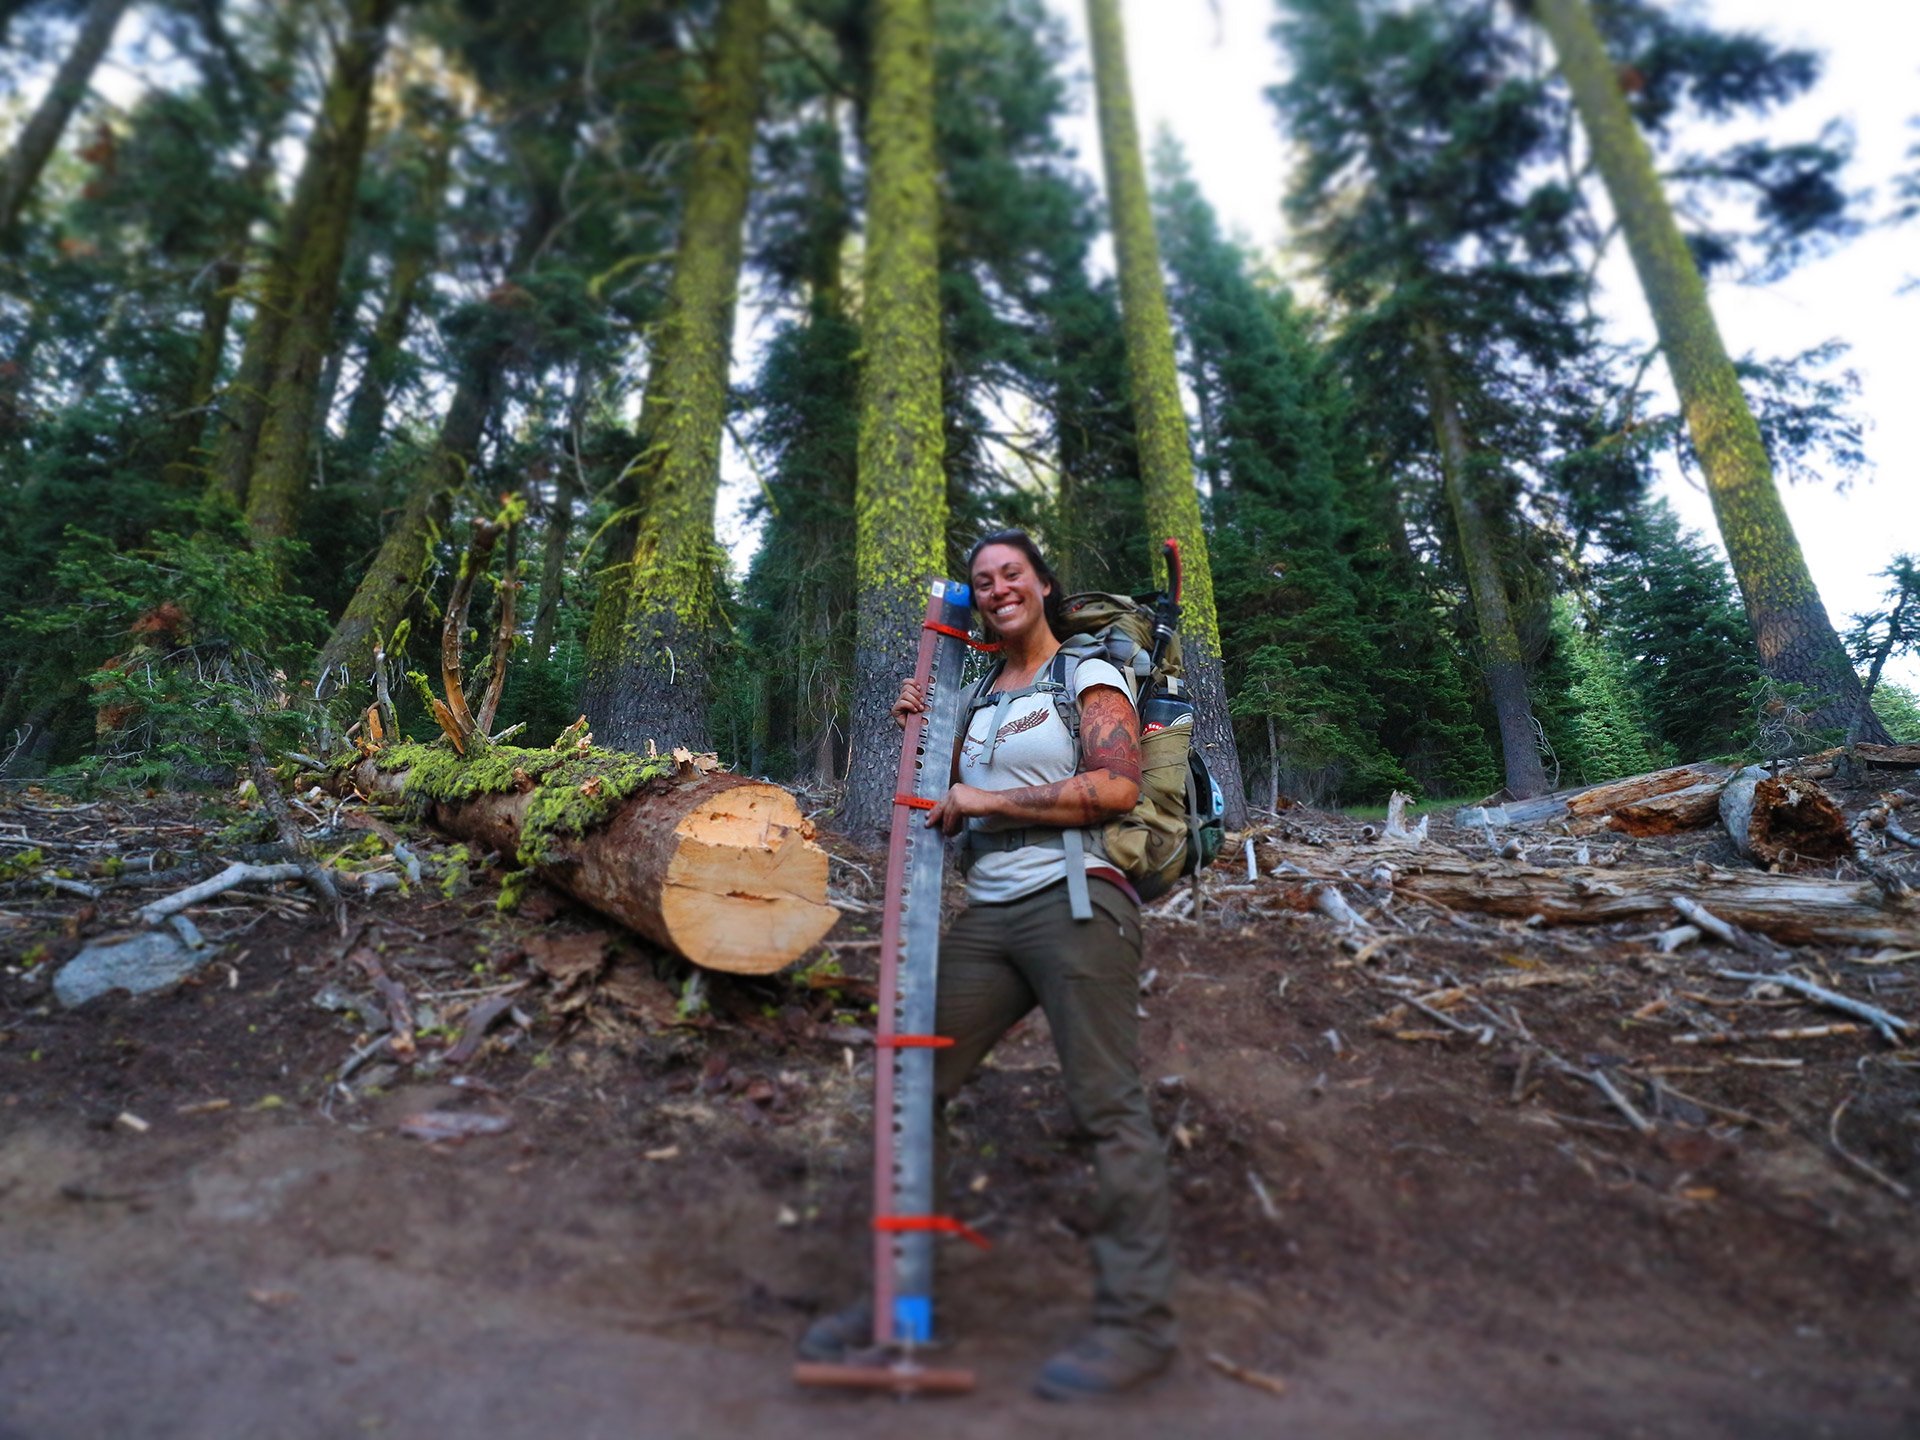 Former Trail Crew Technical Advisor Eleanore Anderson was all smiles with her crosscut saw.